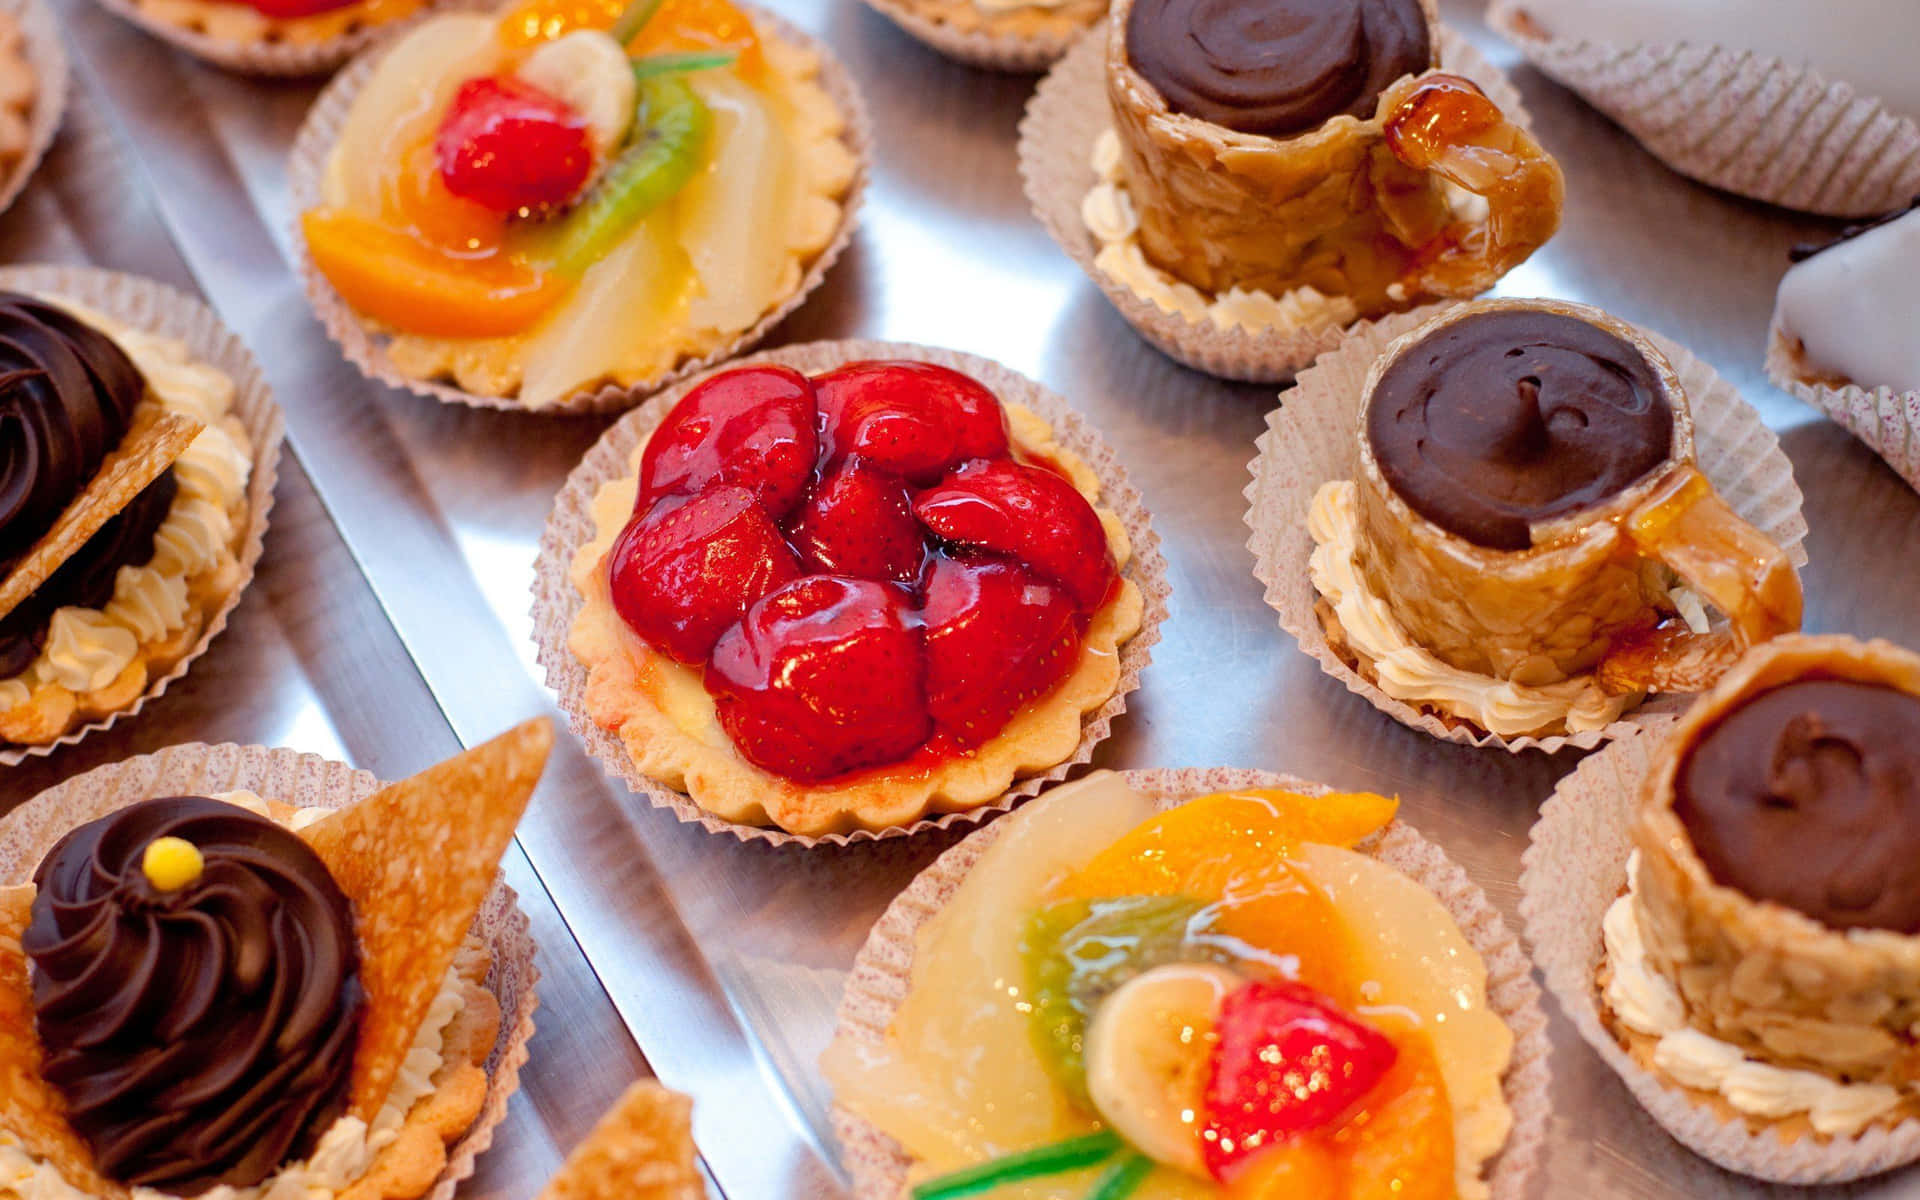 Delicious array of pastries - an ideal treat for any occasion!